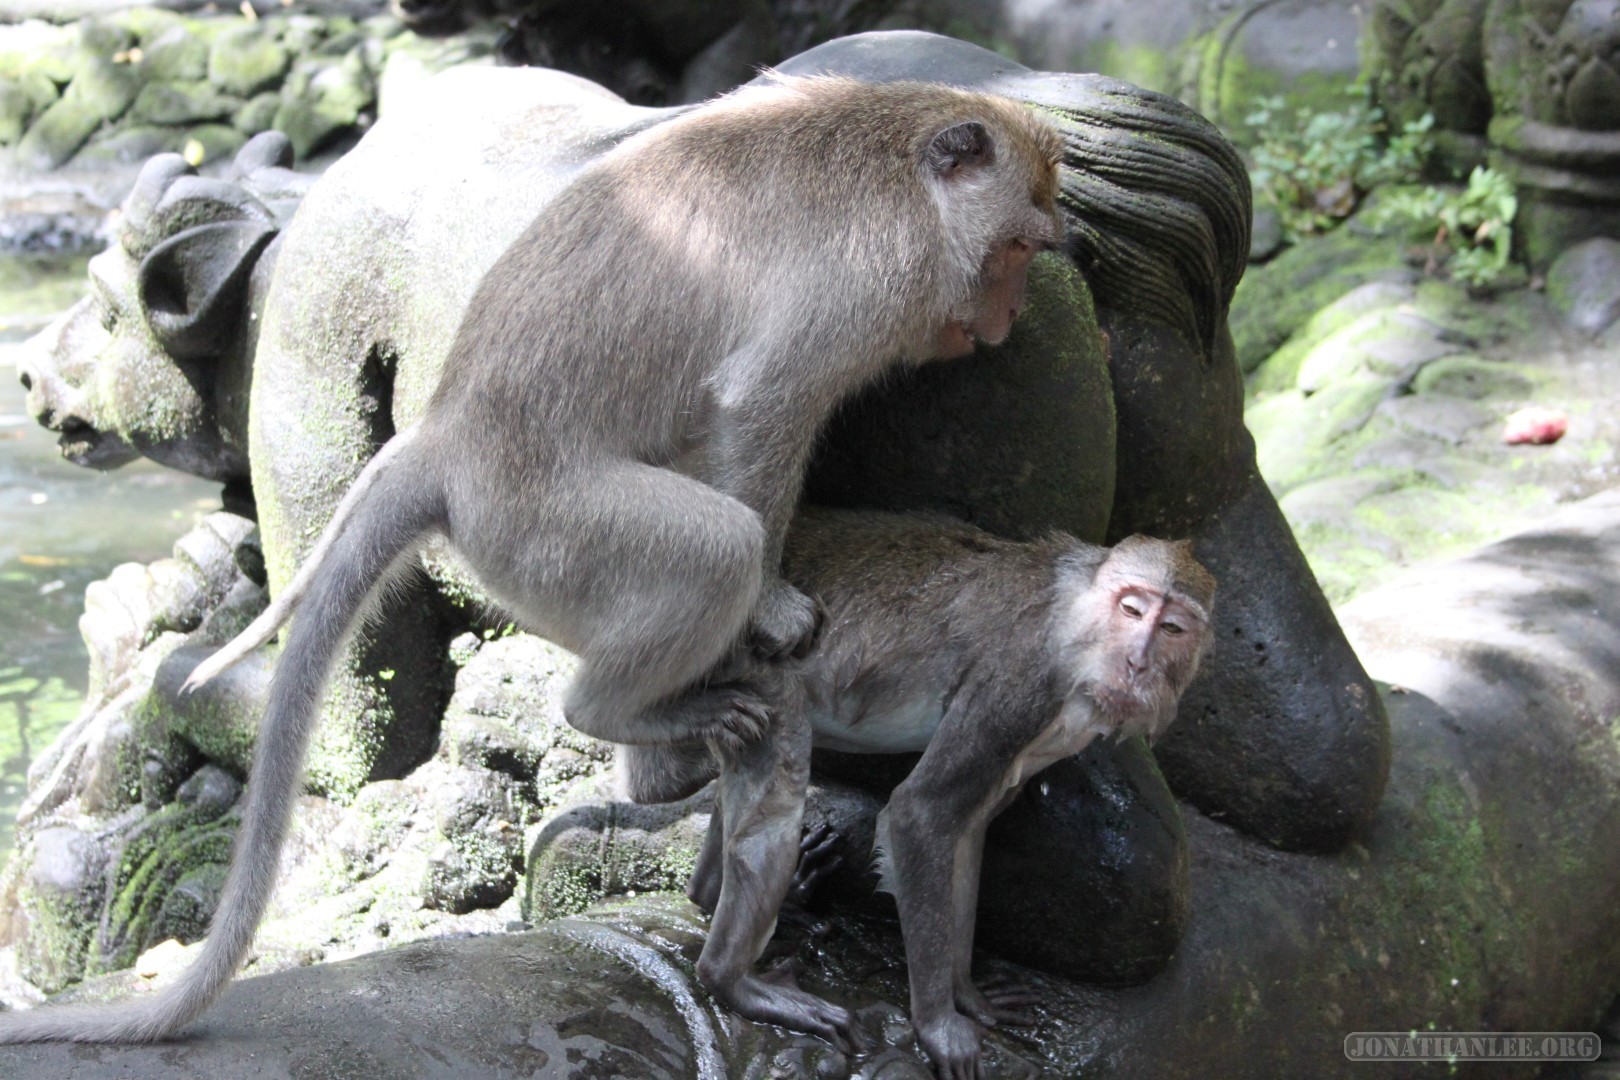 Monkeys Mating With Humans Sex - Monky sex women picture - Porn galleries